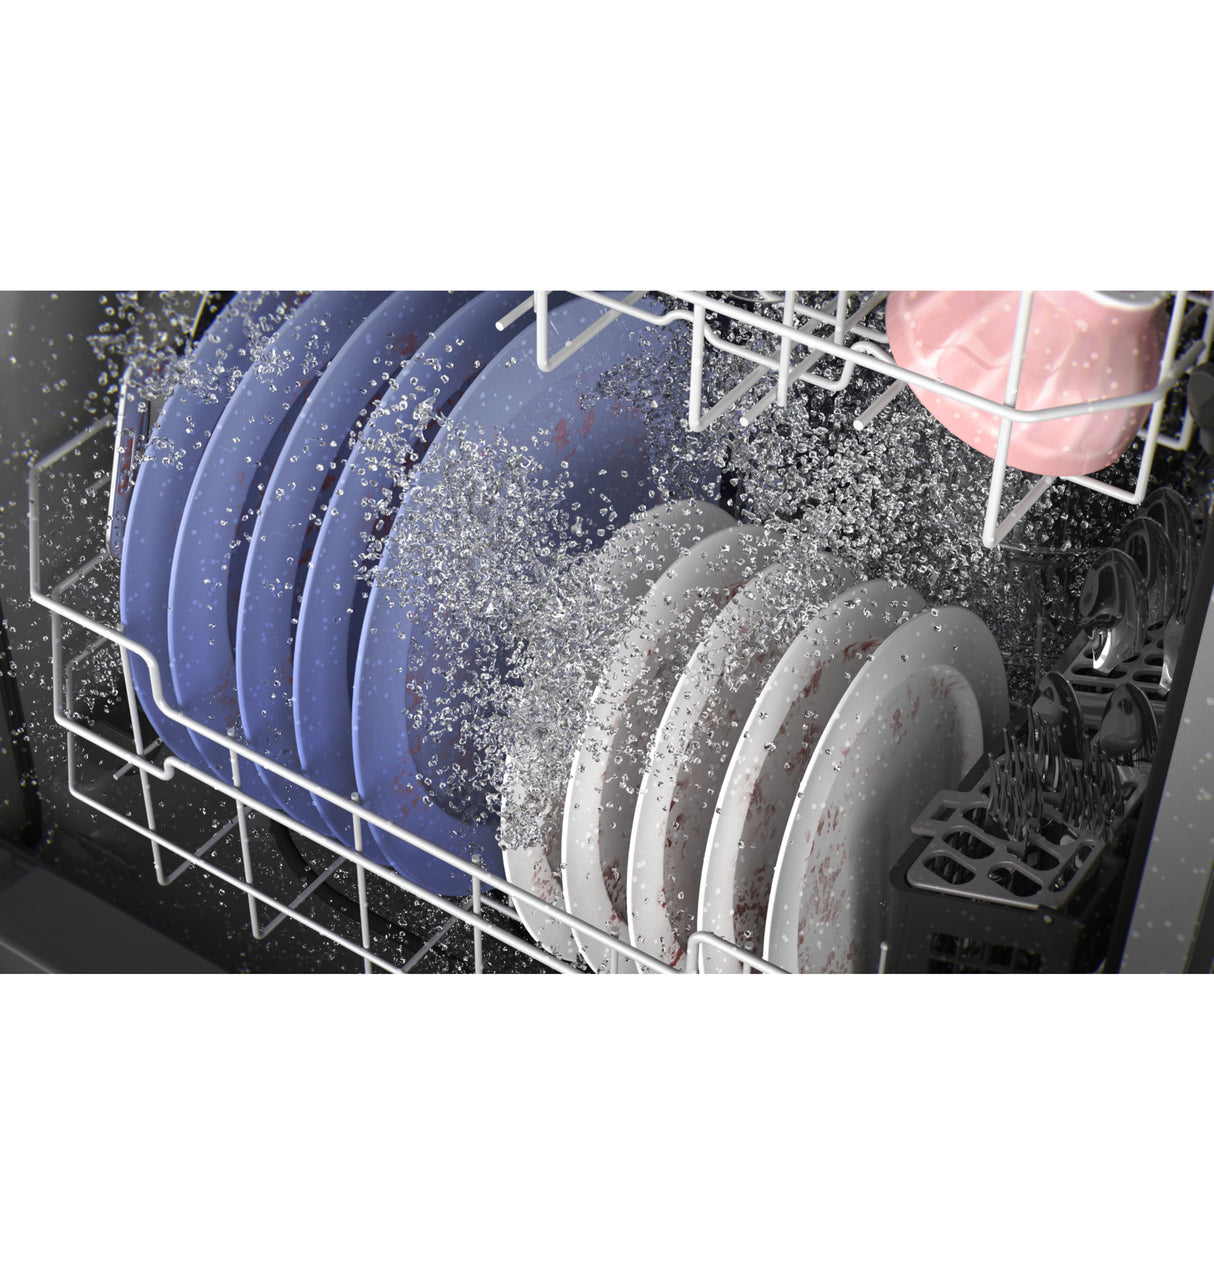 GE(R) ENERGY STAR(R) Top Control with Stainless Steel Interior Door Dishwasher with Sanitize Cycle & Dry Boost - (GDT635HSRSS)